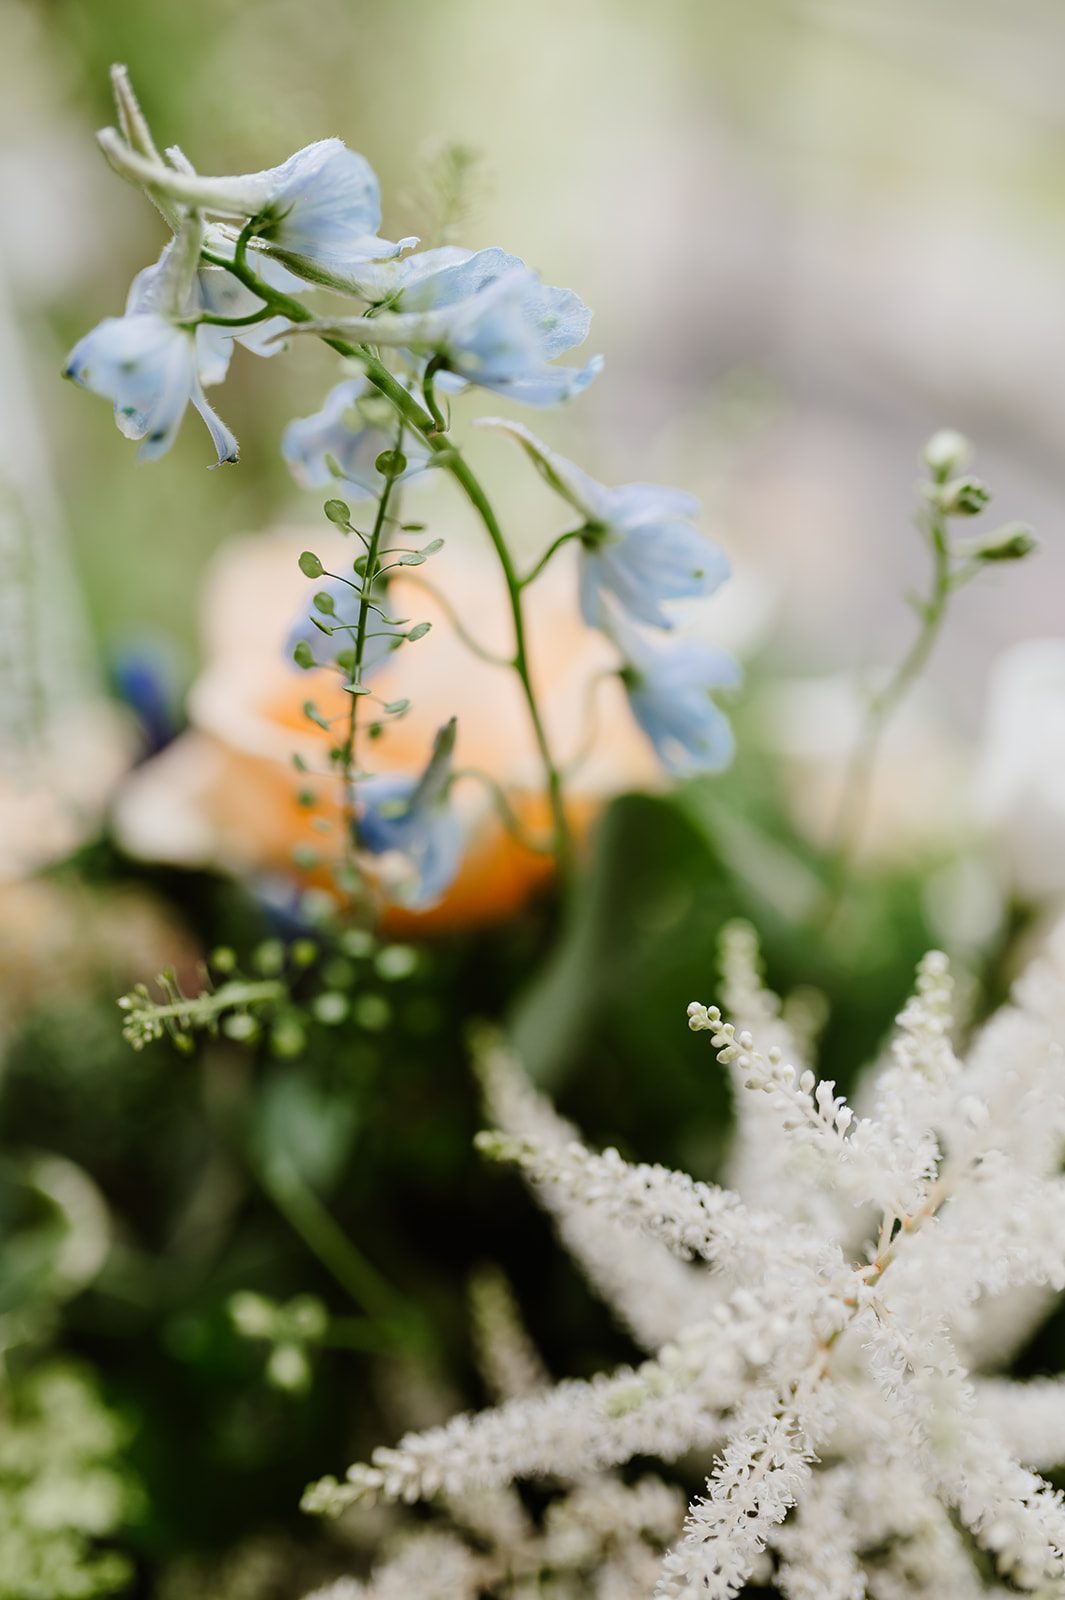 Blue flowers from venue decorations